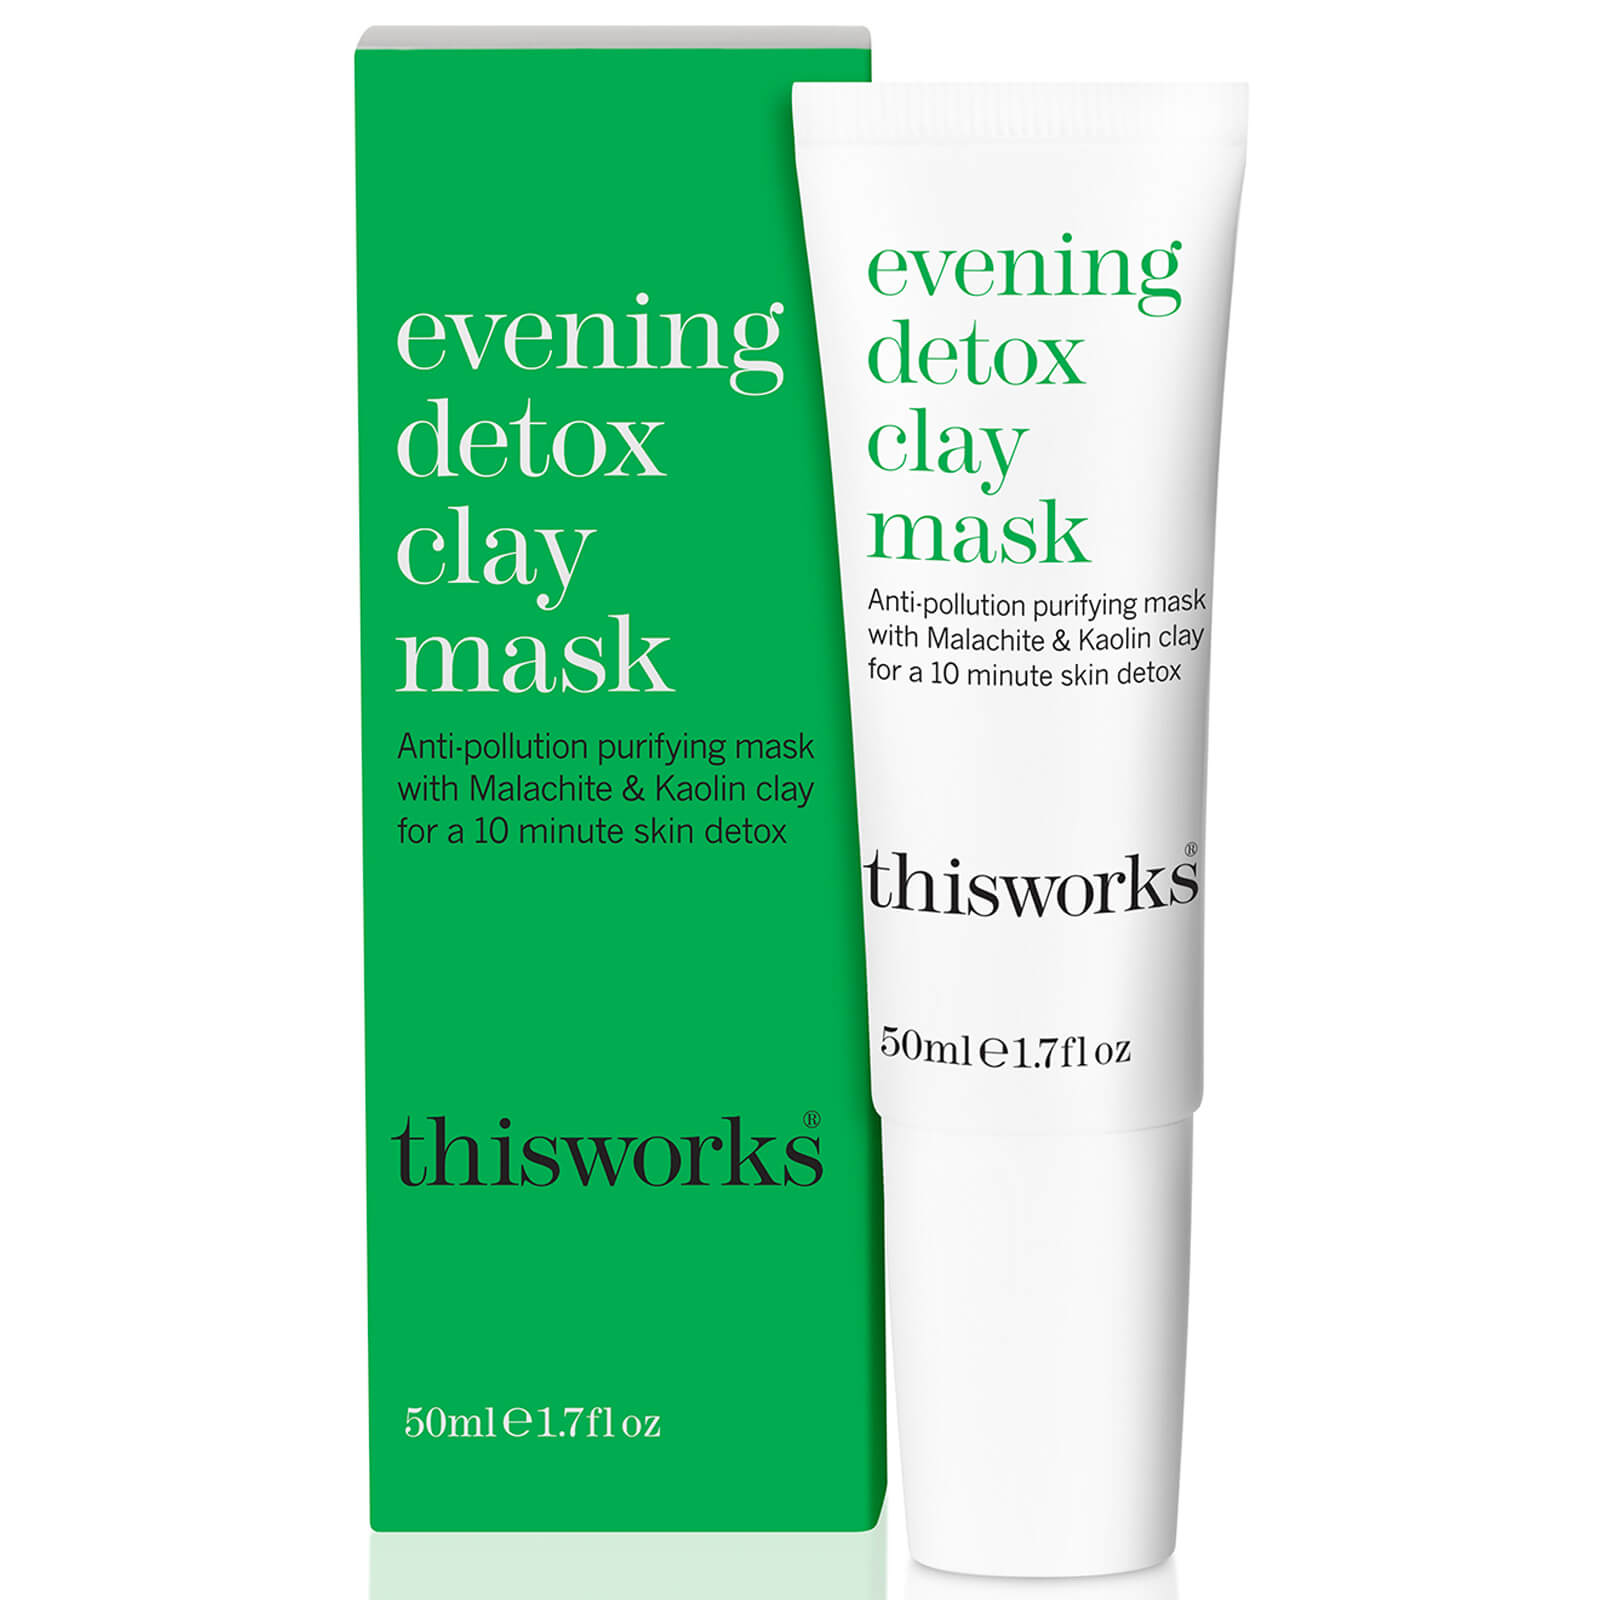 THIS WORKS THIS WORKS EVENING DETOX CLAY MASK 50ML